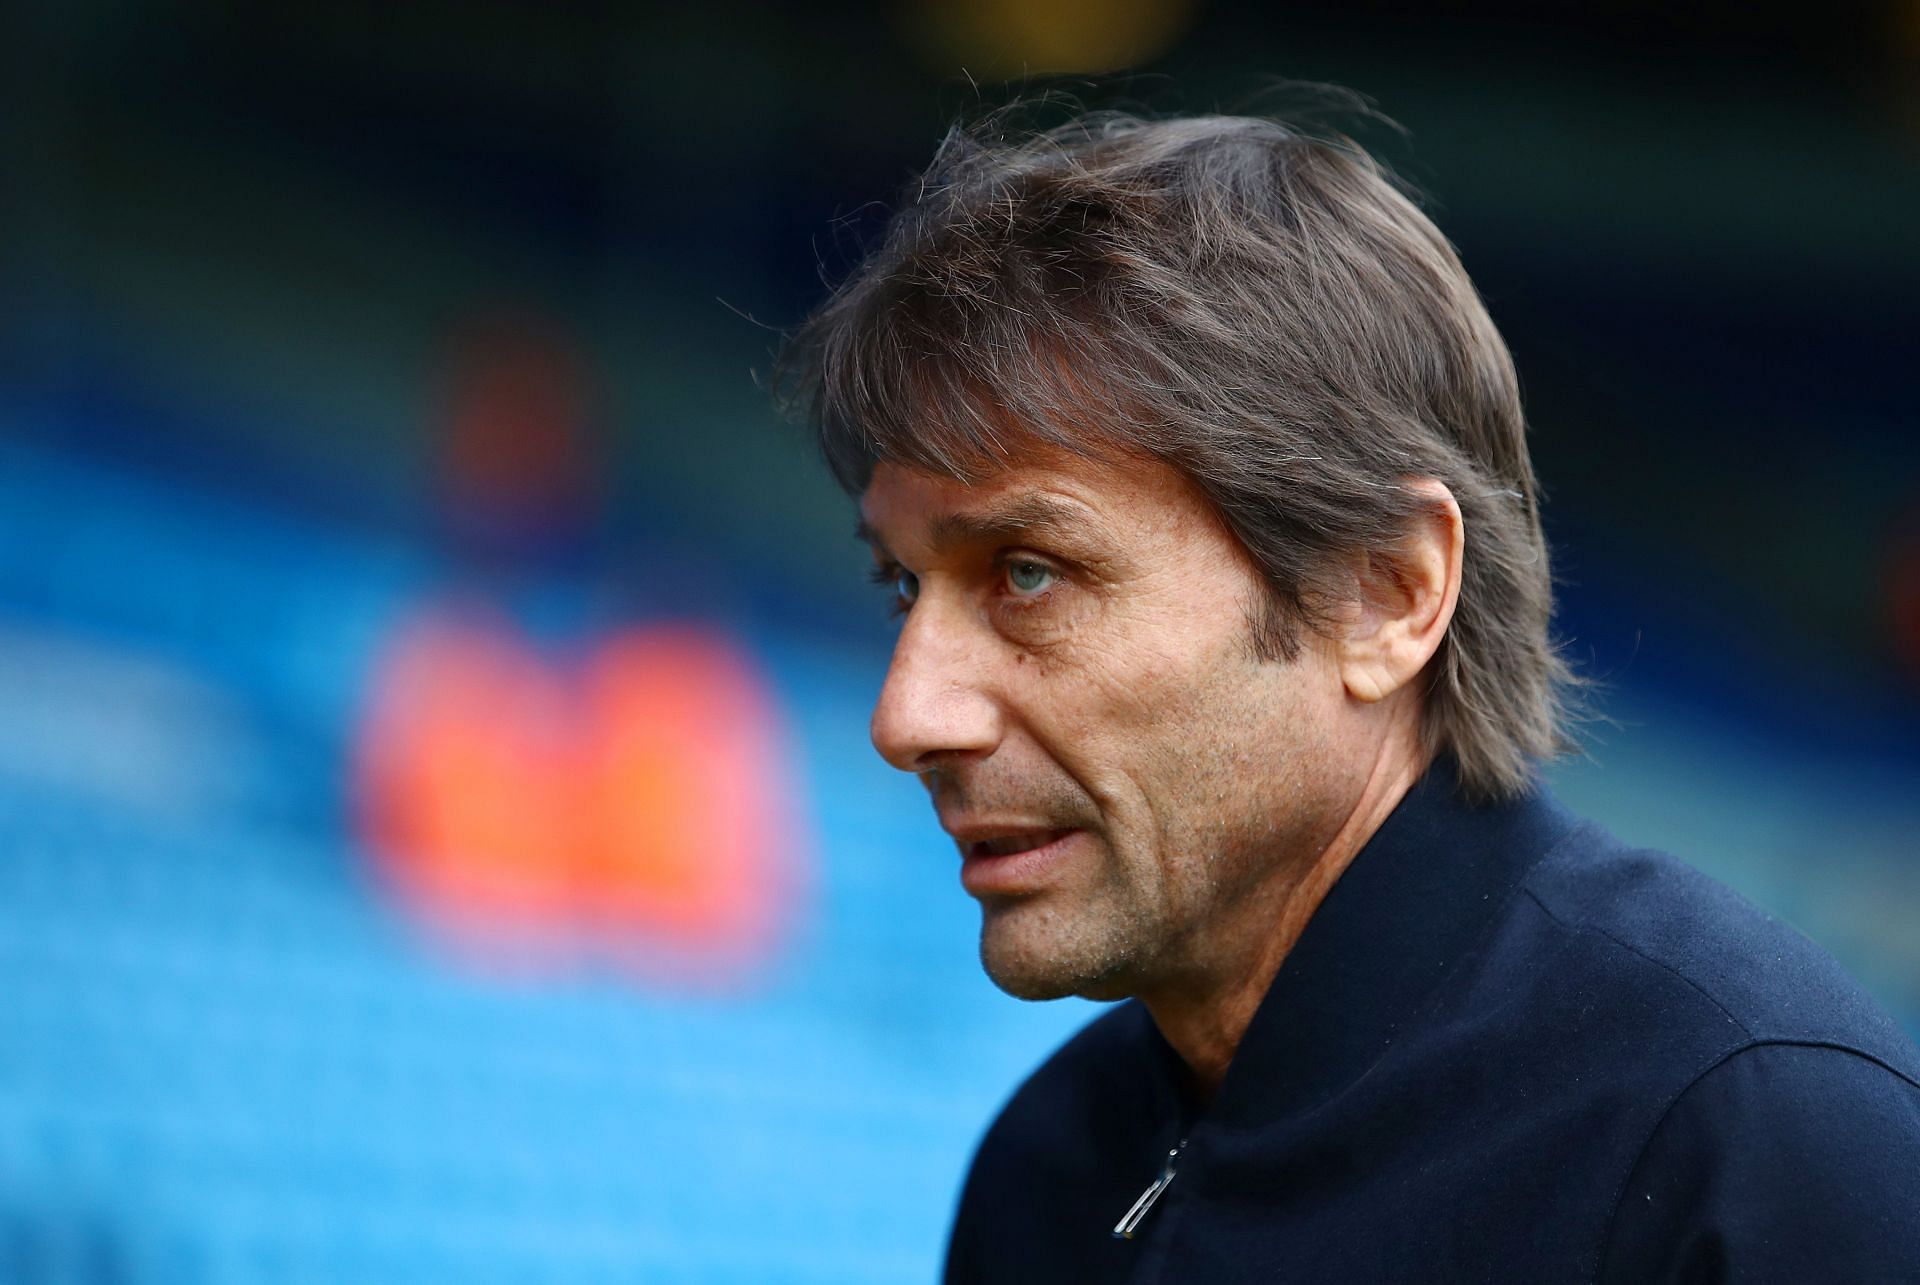 There has been an air of uncertainty over Conte and Spurs